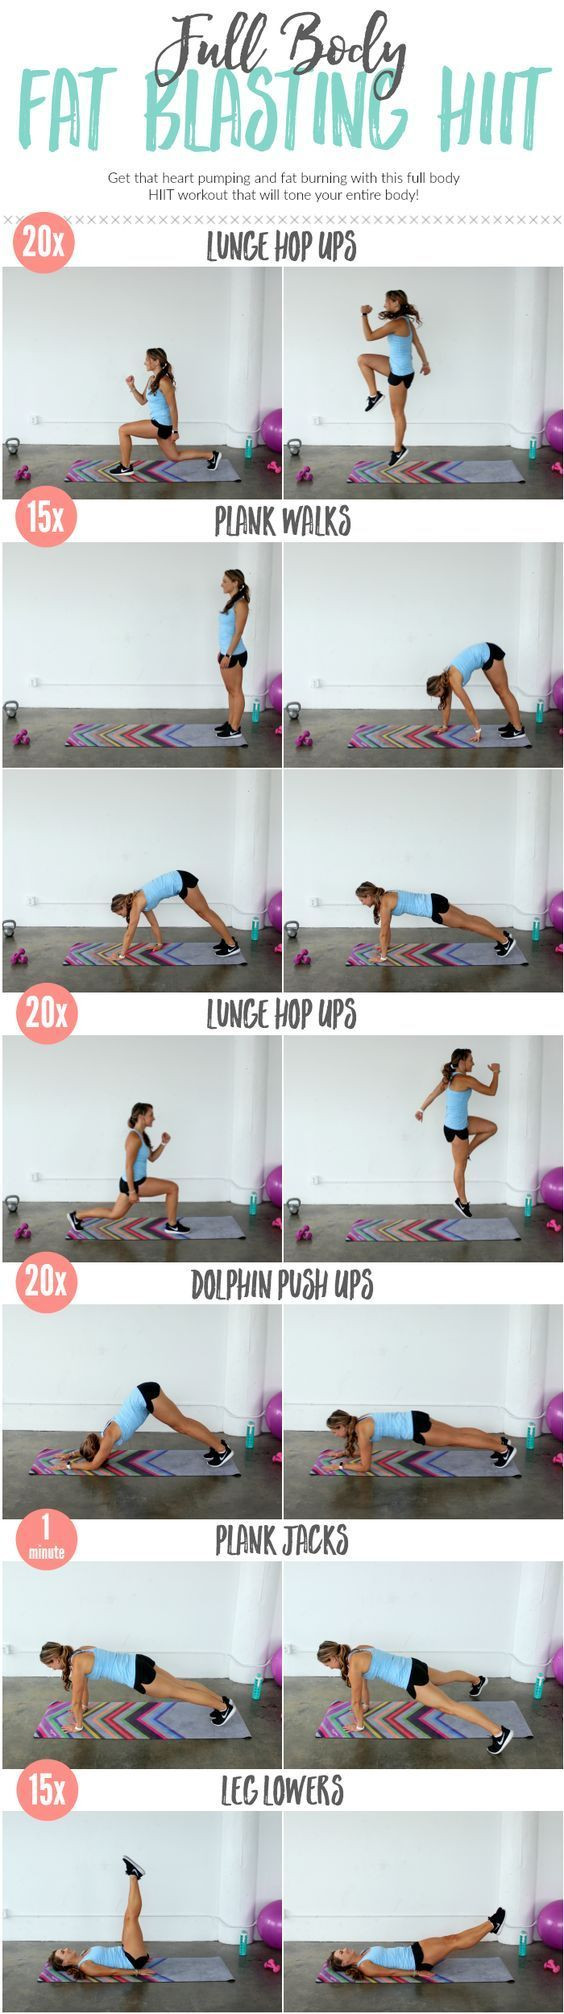 Burn Belly Fat At Home
 51 Fat Burning Workouts That Fit Into ANY Busy Schedule